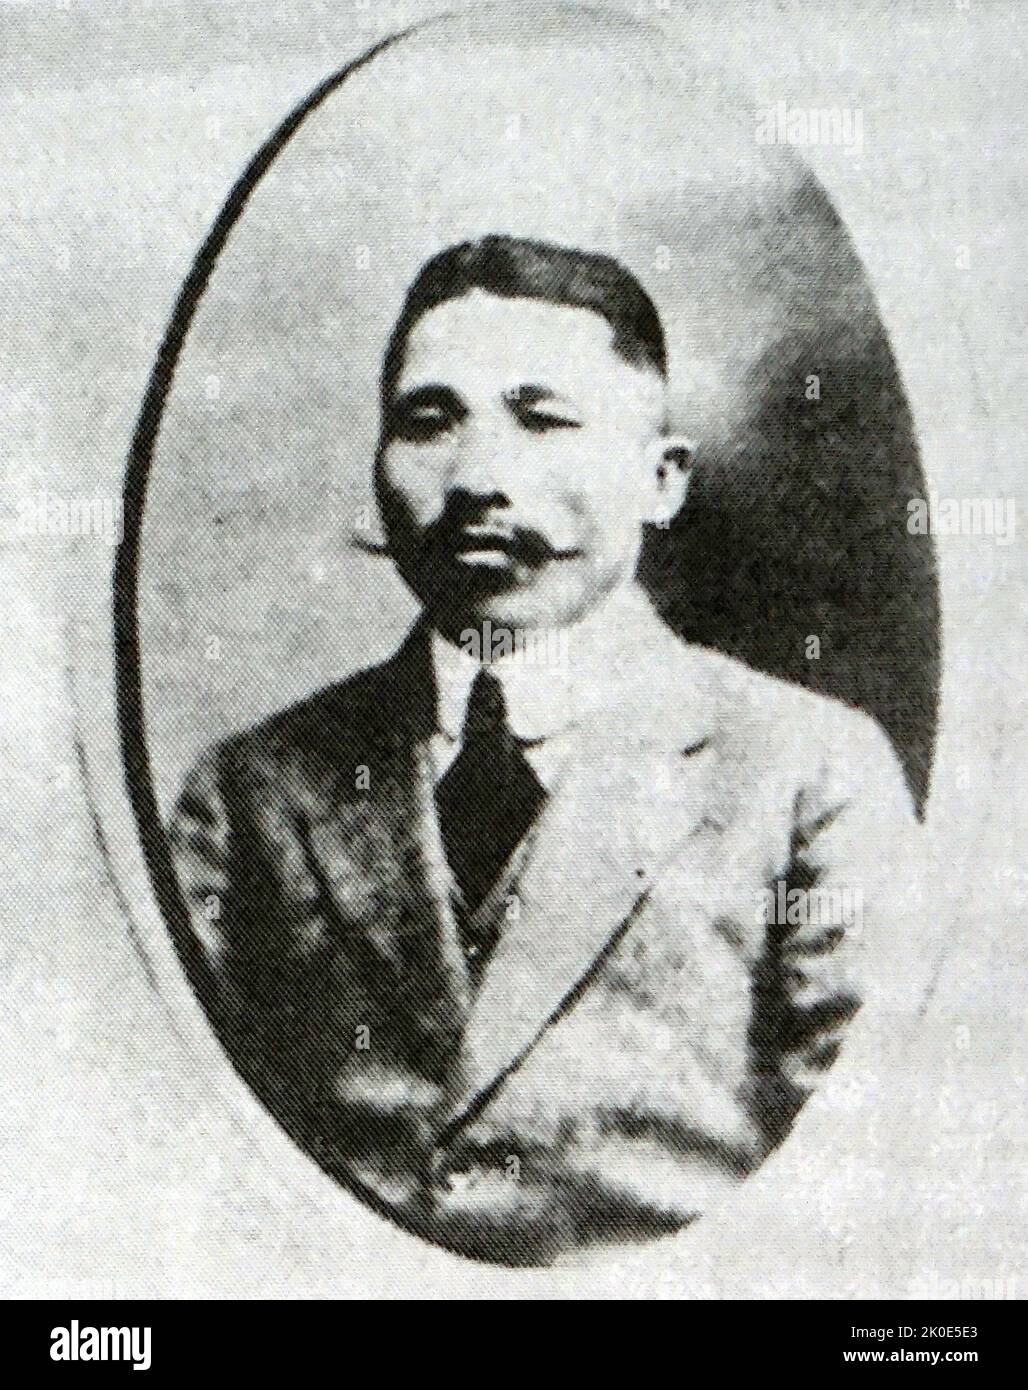 Kim Gu (1876 - 1949), also known by his pen name Baekbeom, in 1911. Korean statesman politician. He was the sixth, ninth and later the last President of the Provisional Government of the Republic of Korea, a leader of the Korean independence movement against the Japanese Empire and a reunification activist after 1945. He was assassinated by Korean lieutenant Ahn Doo-hee in 1949. Stock Photo